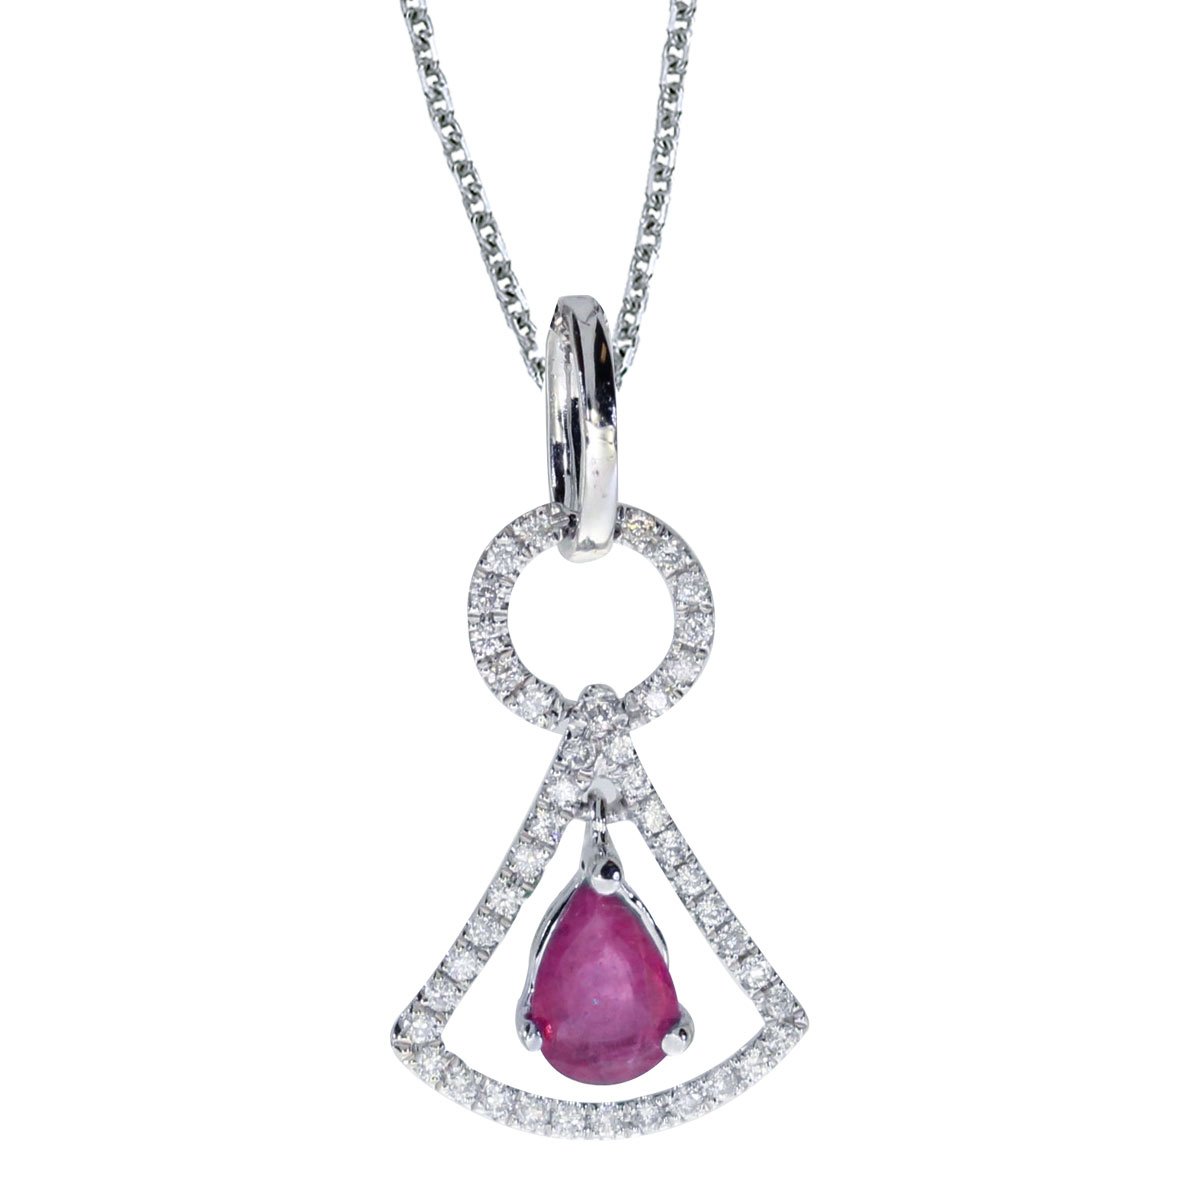 This unique 14k white gold  pendant features  a striking 6x4 mm pear ruby and .16 carats of shimmering diamond.